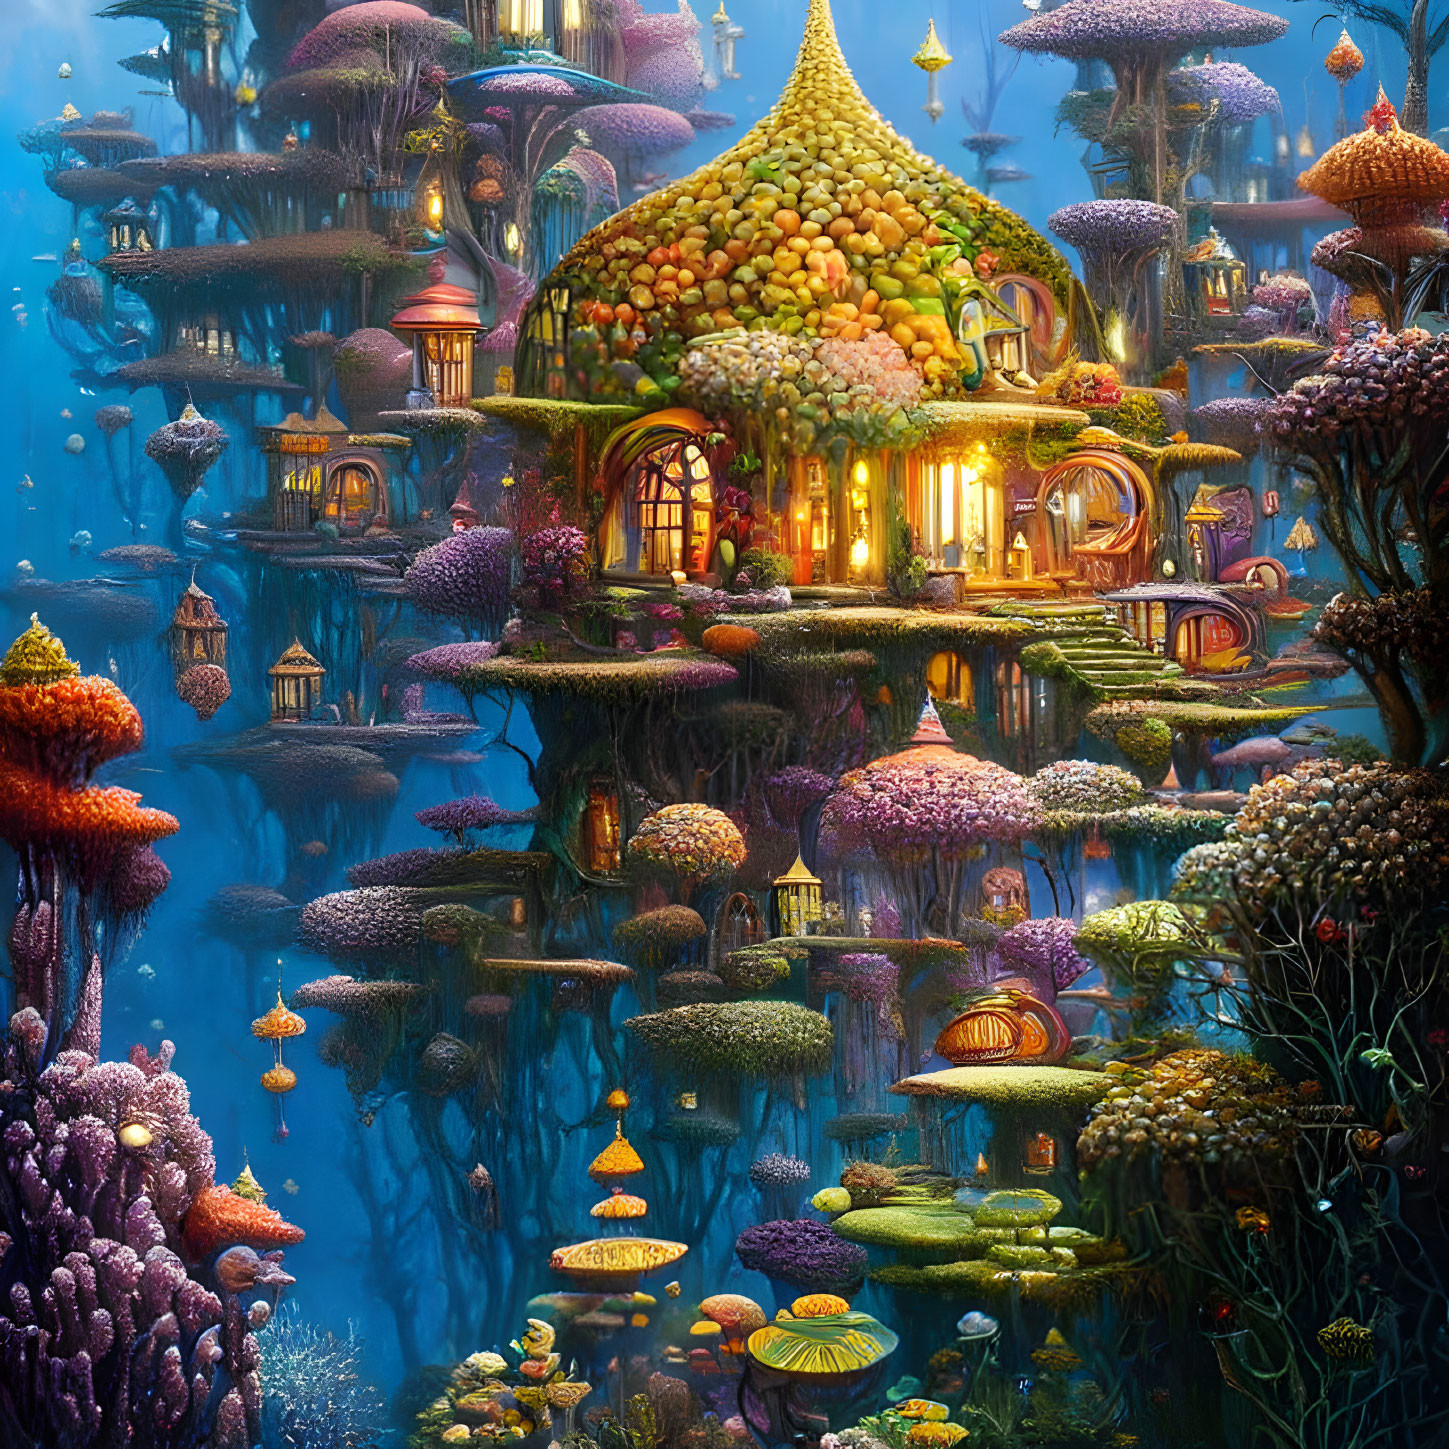 Underwater scene with illuminated house, coral-like mushrooms, and floating islands